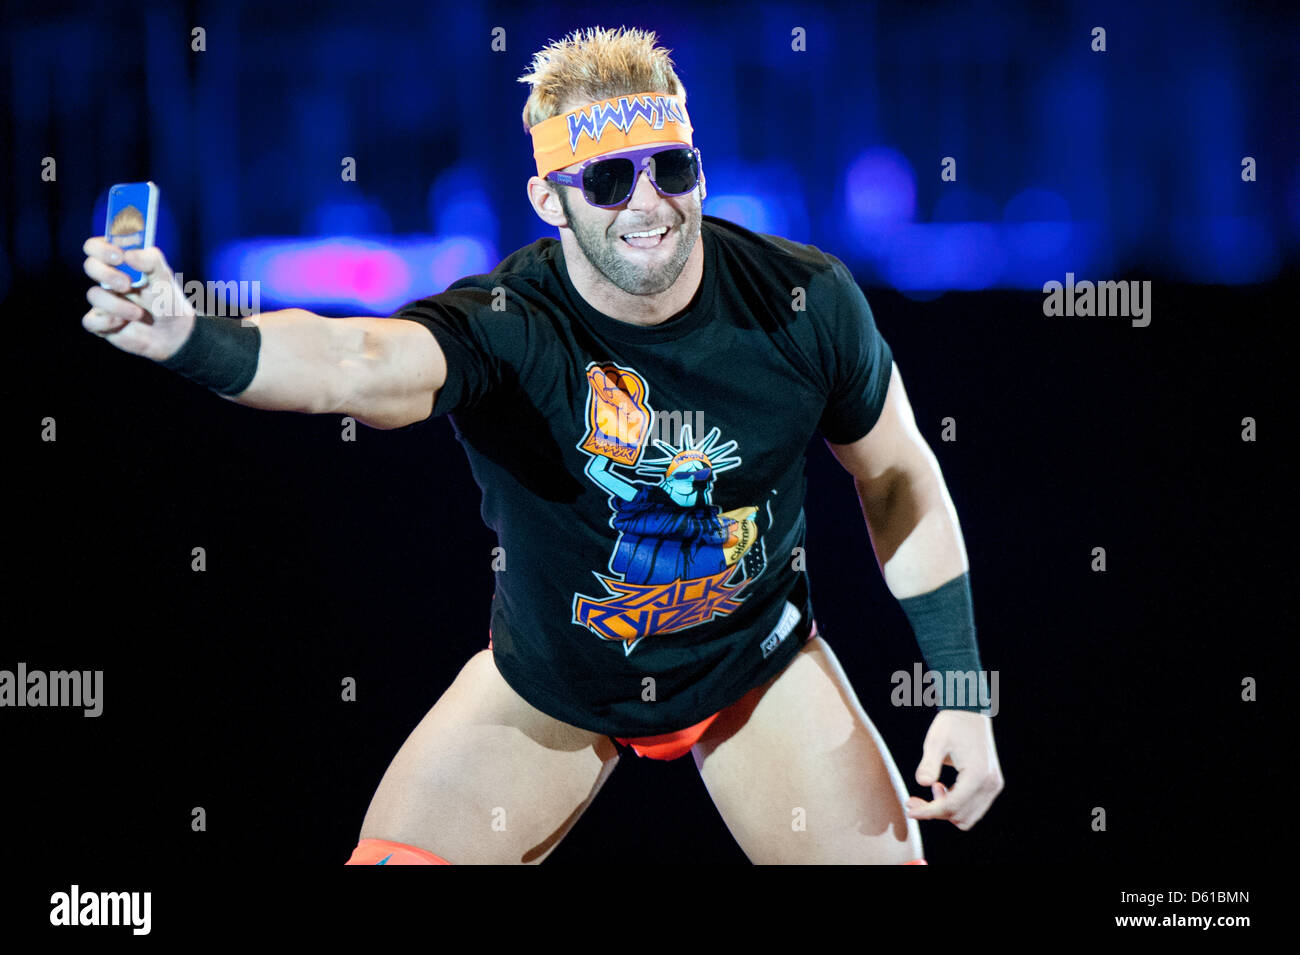 US-wrestler Zack Ryder smiles and gestures prior to a fight at the RAW WrestleMania Revenge Tour at the o2 World canue in Berlin, Germany, 14 April 2012. The WWE (World Wrestling Entertainment) celebrates its 20th German anniversary this April. The first show in Germany was staged in Kiel, Germany, in April 1992. Photo: Sebastian Kahnert Stock Photo